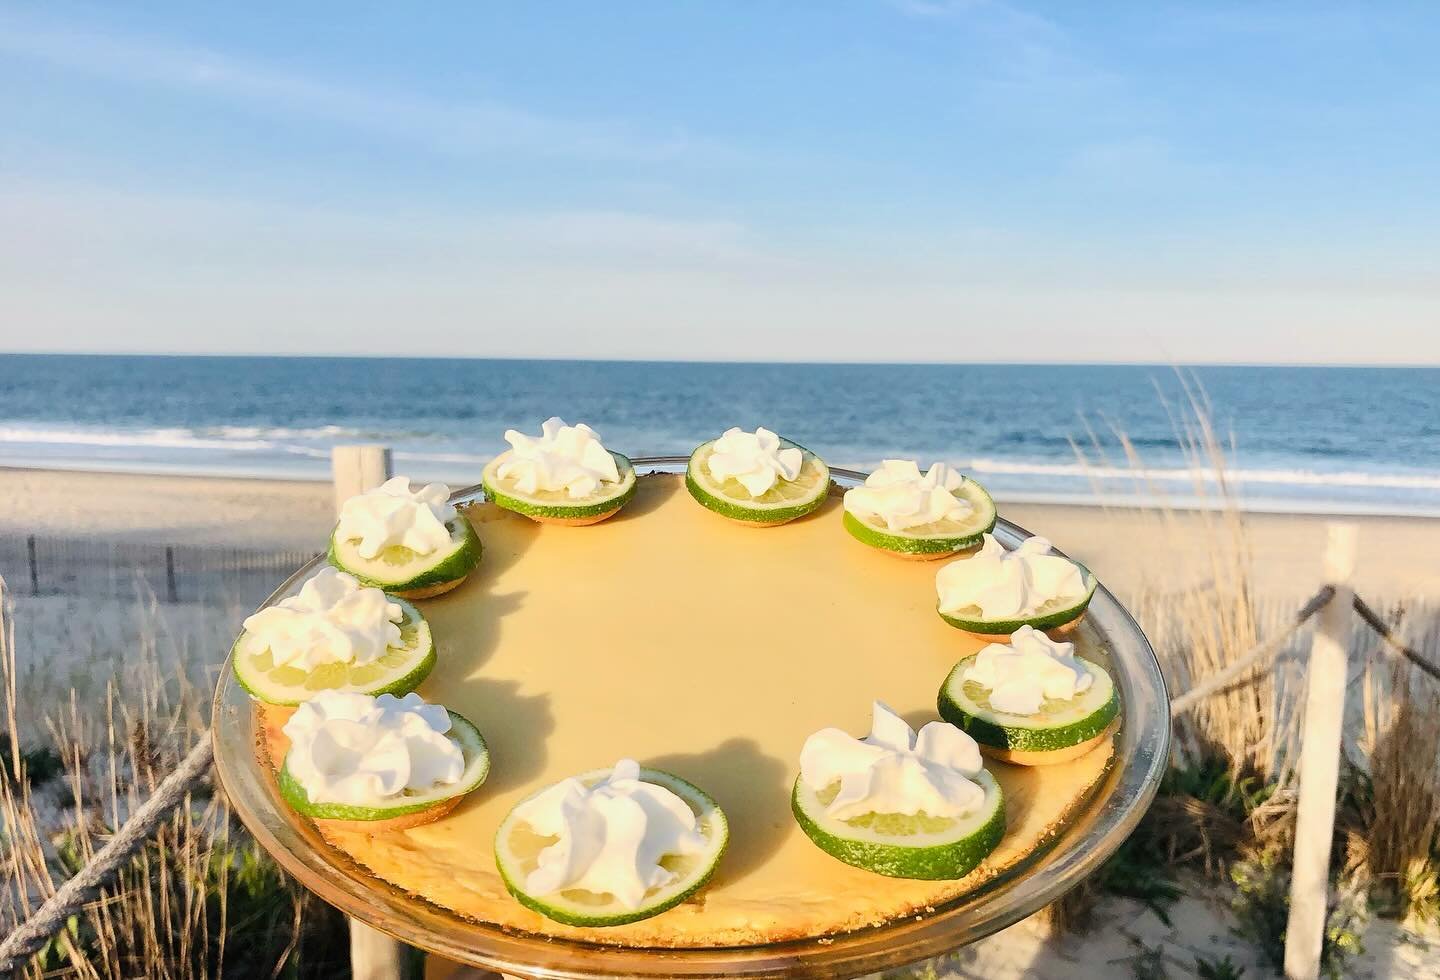 Sedona&rsquo;s famous Whole Our Own Key Lime Pie. Strawberry Puree with Whipped Cream. Made in house. Available for purchase via our website and for pick-up only between 5:00pm - 7:00pm. Our address is 26 N Pennsylvania Ave Bethany Beach, DE 19930